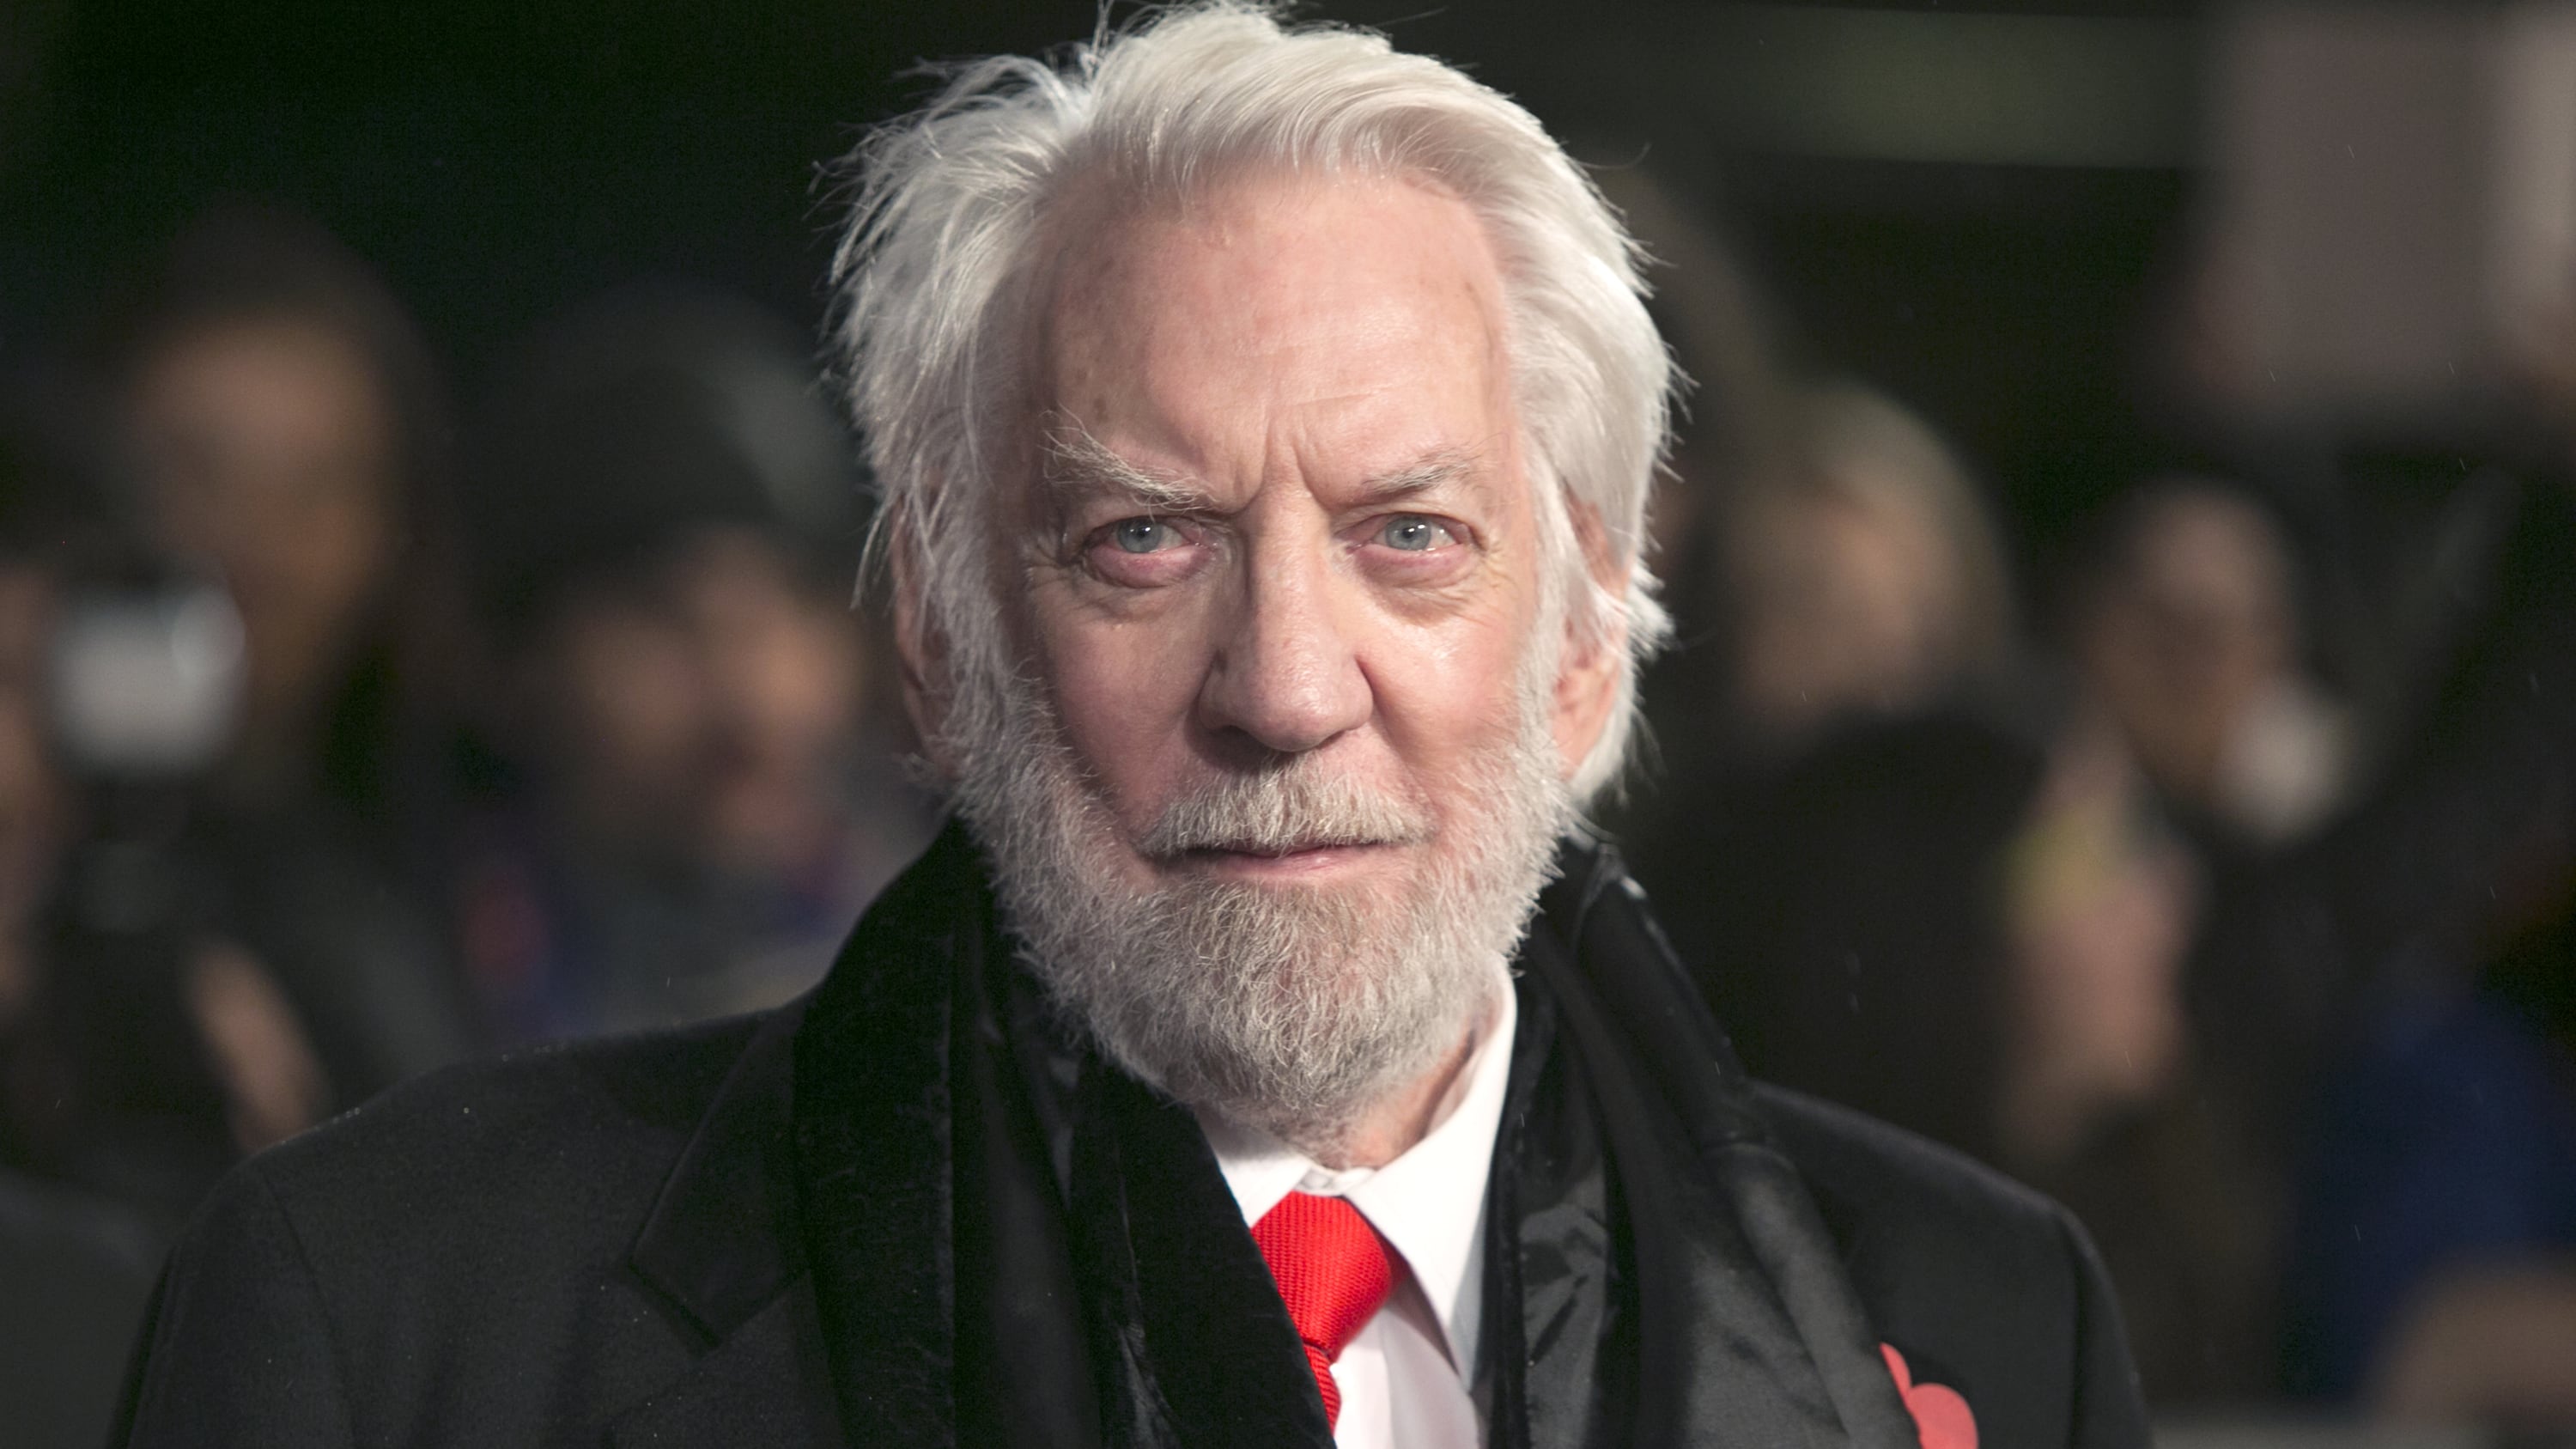 Donald Sutherland was equally at home playing both heroes and villains